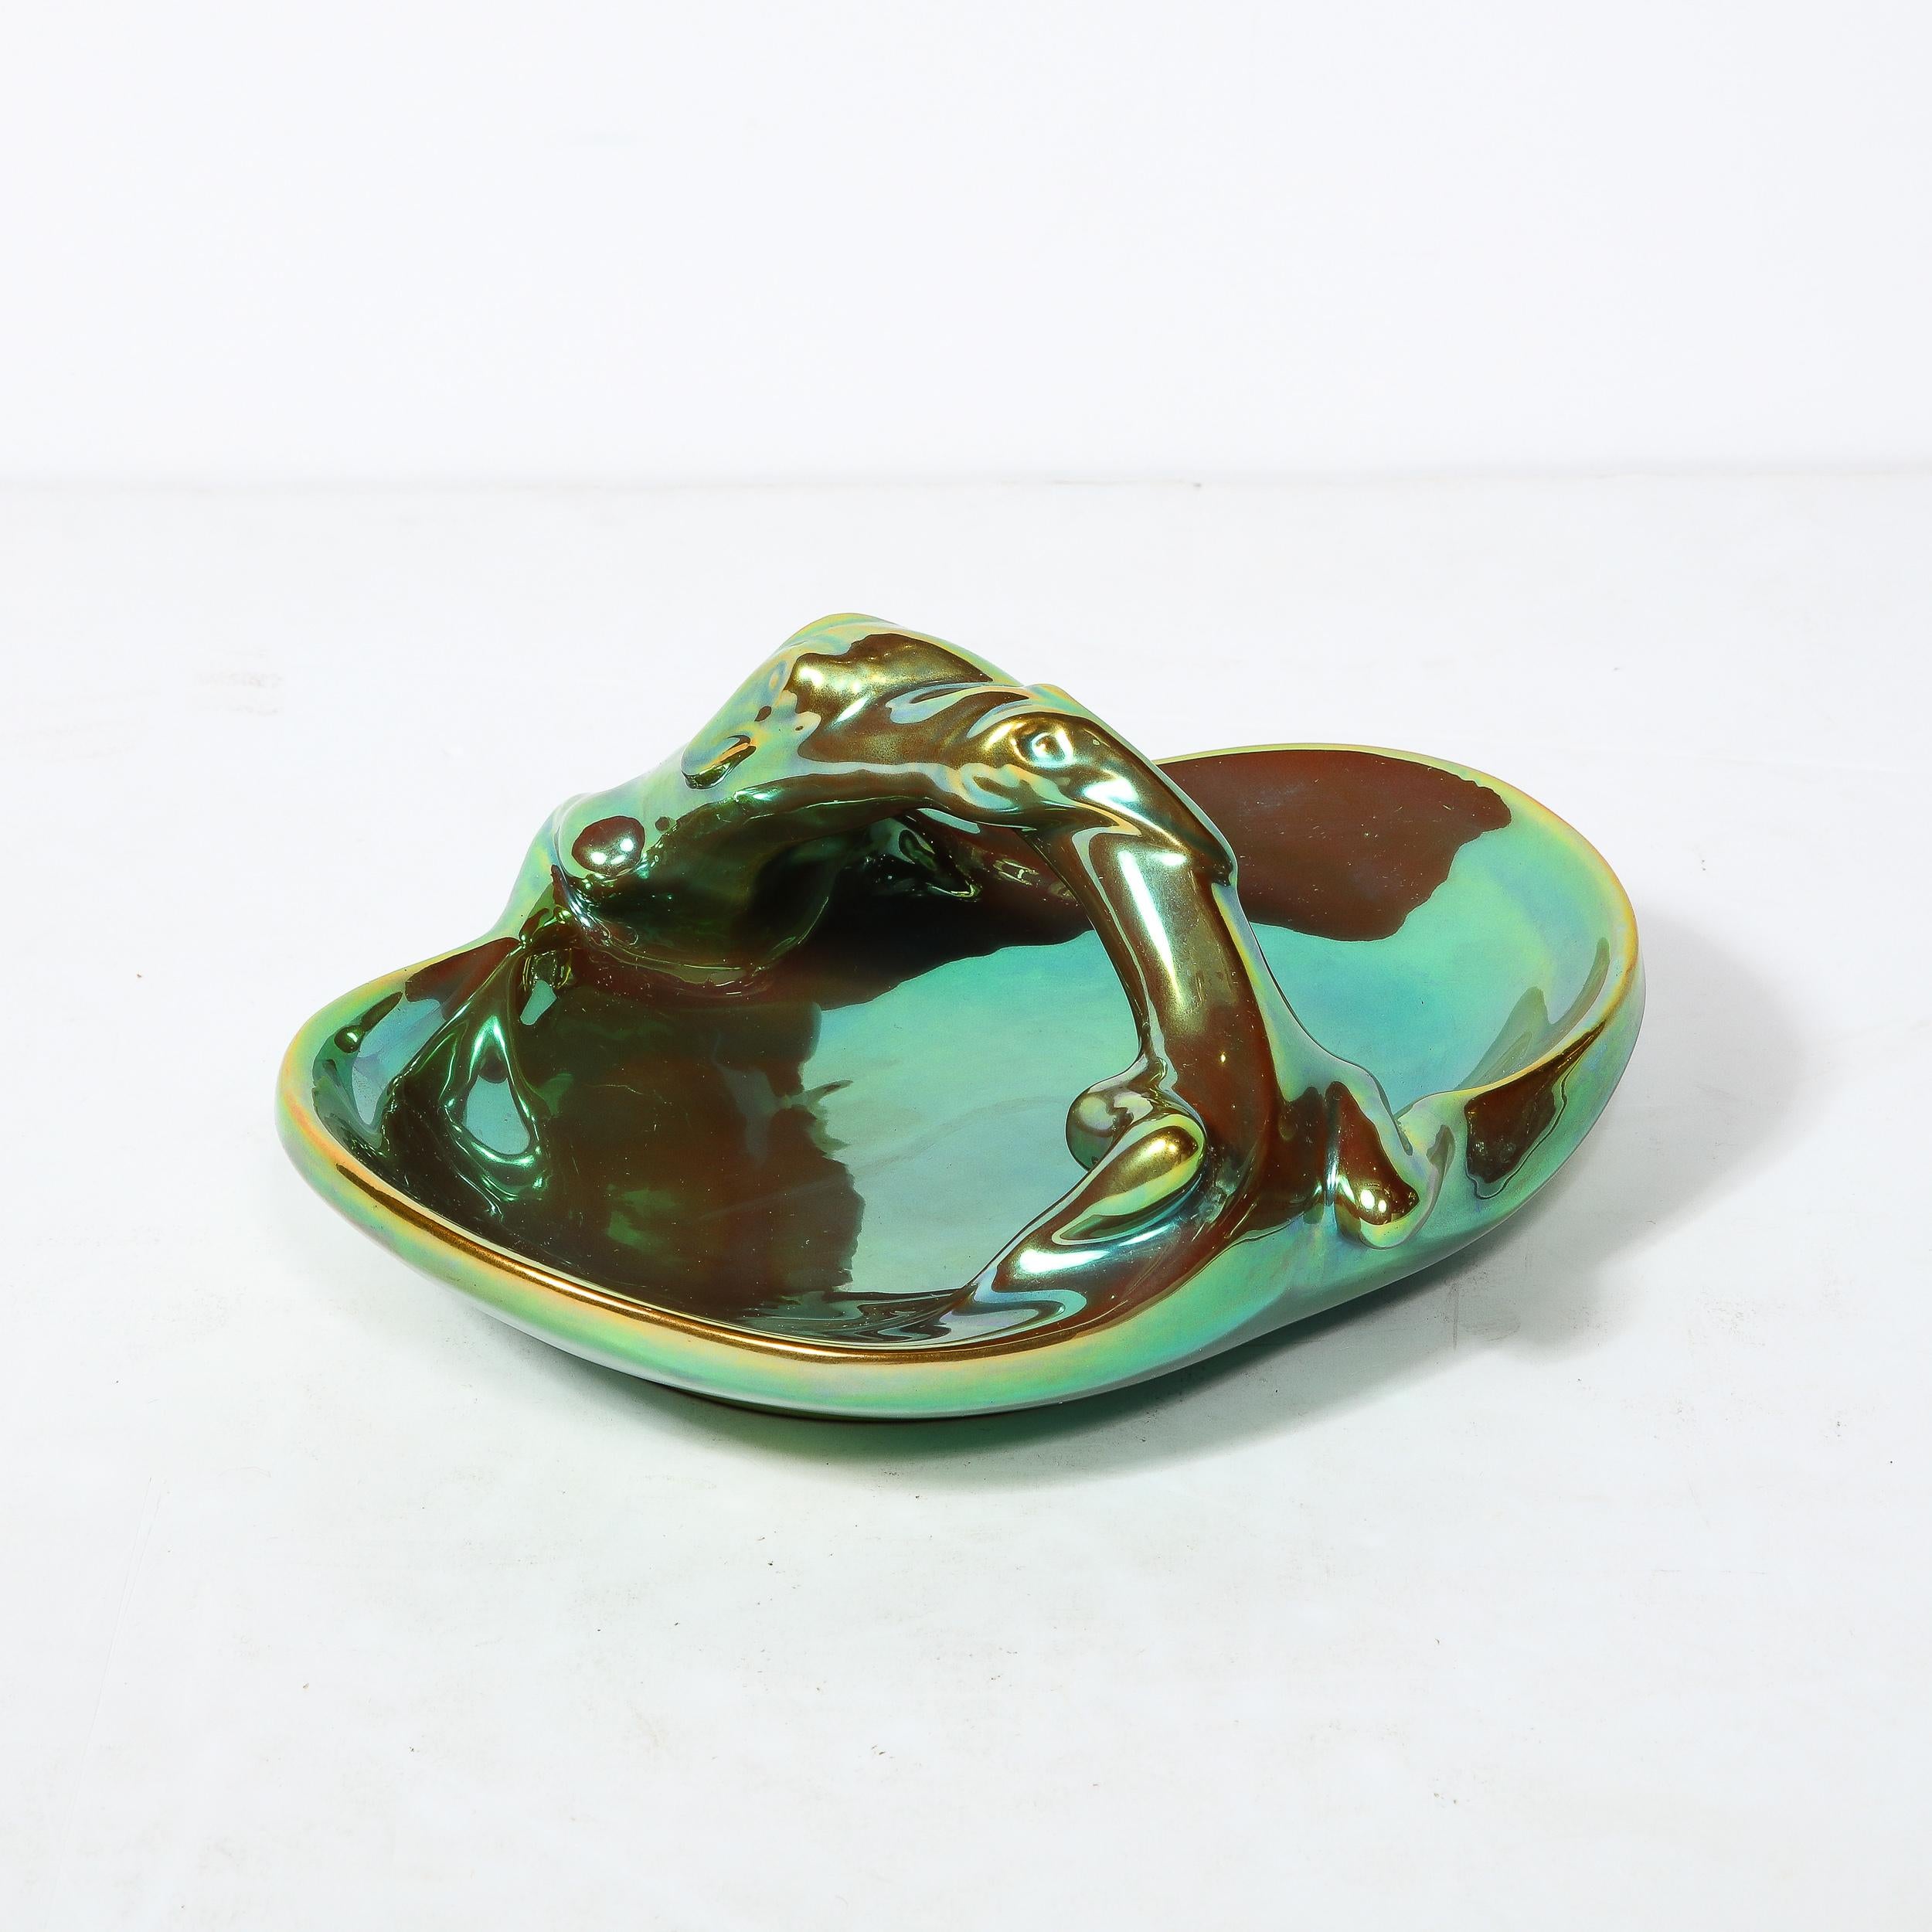 This Lovely and captivating Art Deco Ceramic Dish by Zsolnay Eosin Originates from Hungary, Circa 1930. Reflective Greens and violets gleam from stunning surface of the iridescent metallic glaze.Basket style featuring a sculptural handle of two